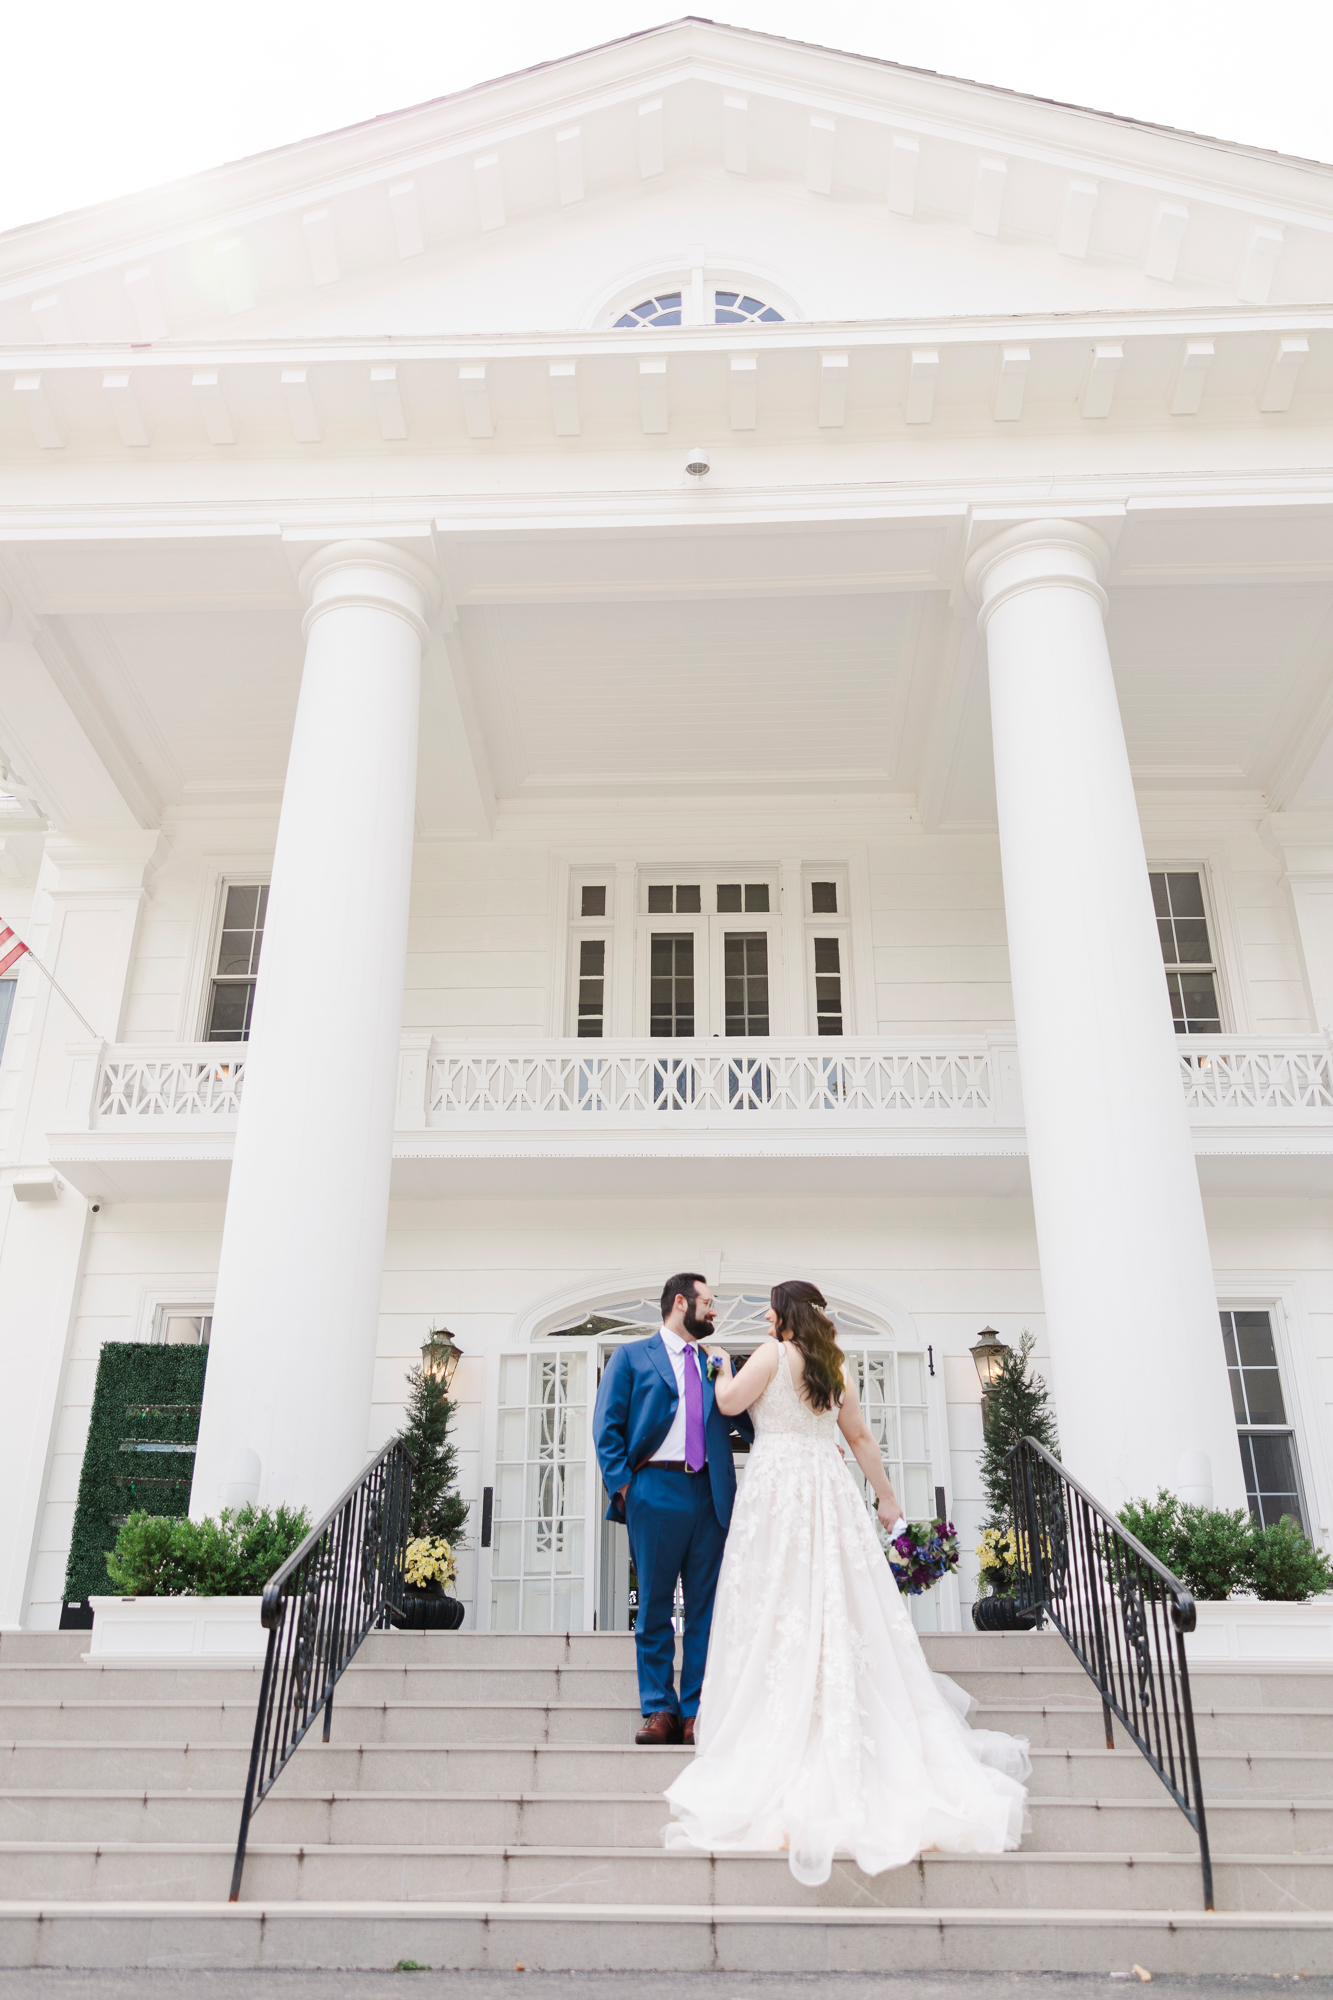 Vibrant Wedding at Briarcliff Manor in New York